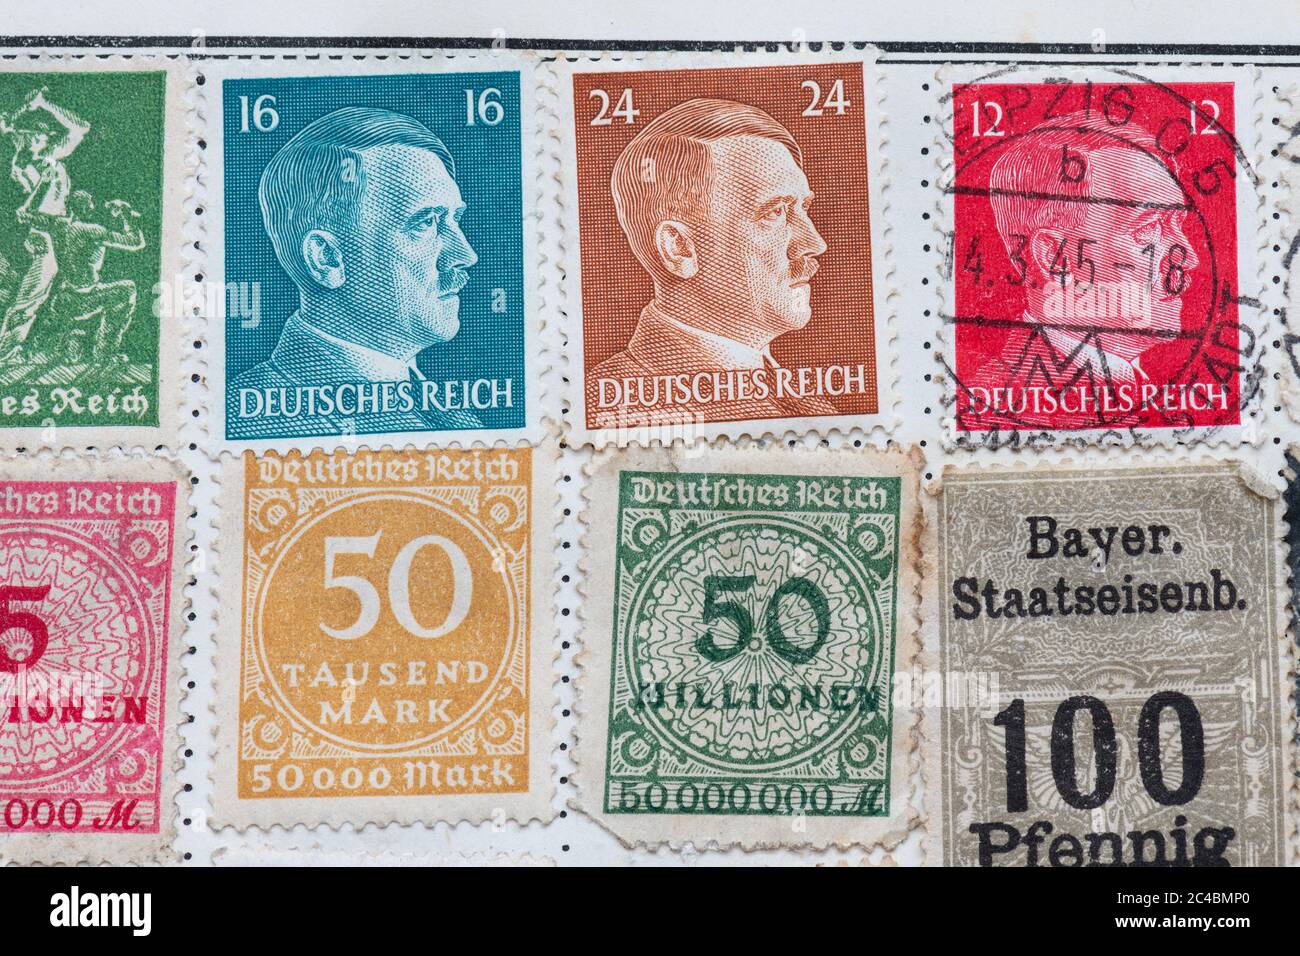 German postage stamps in stamp album - Hitler portrait head and large denomination hyperinflation stamps and Bavarian State Railway stamp Stock Photo